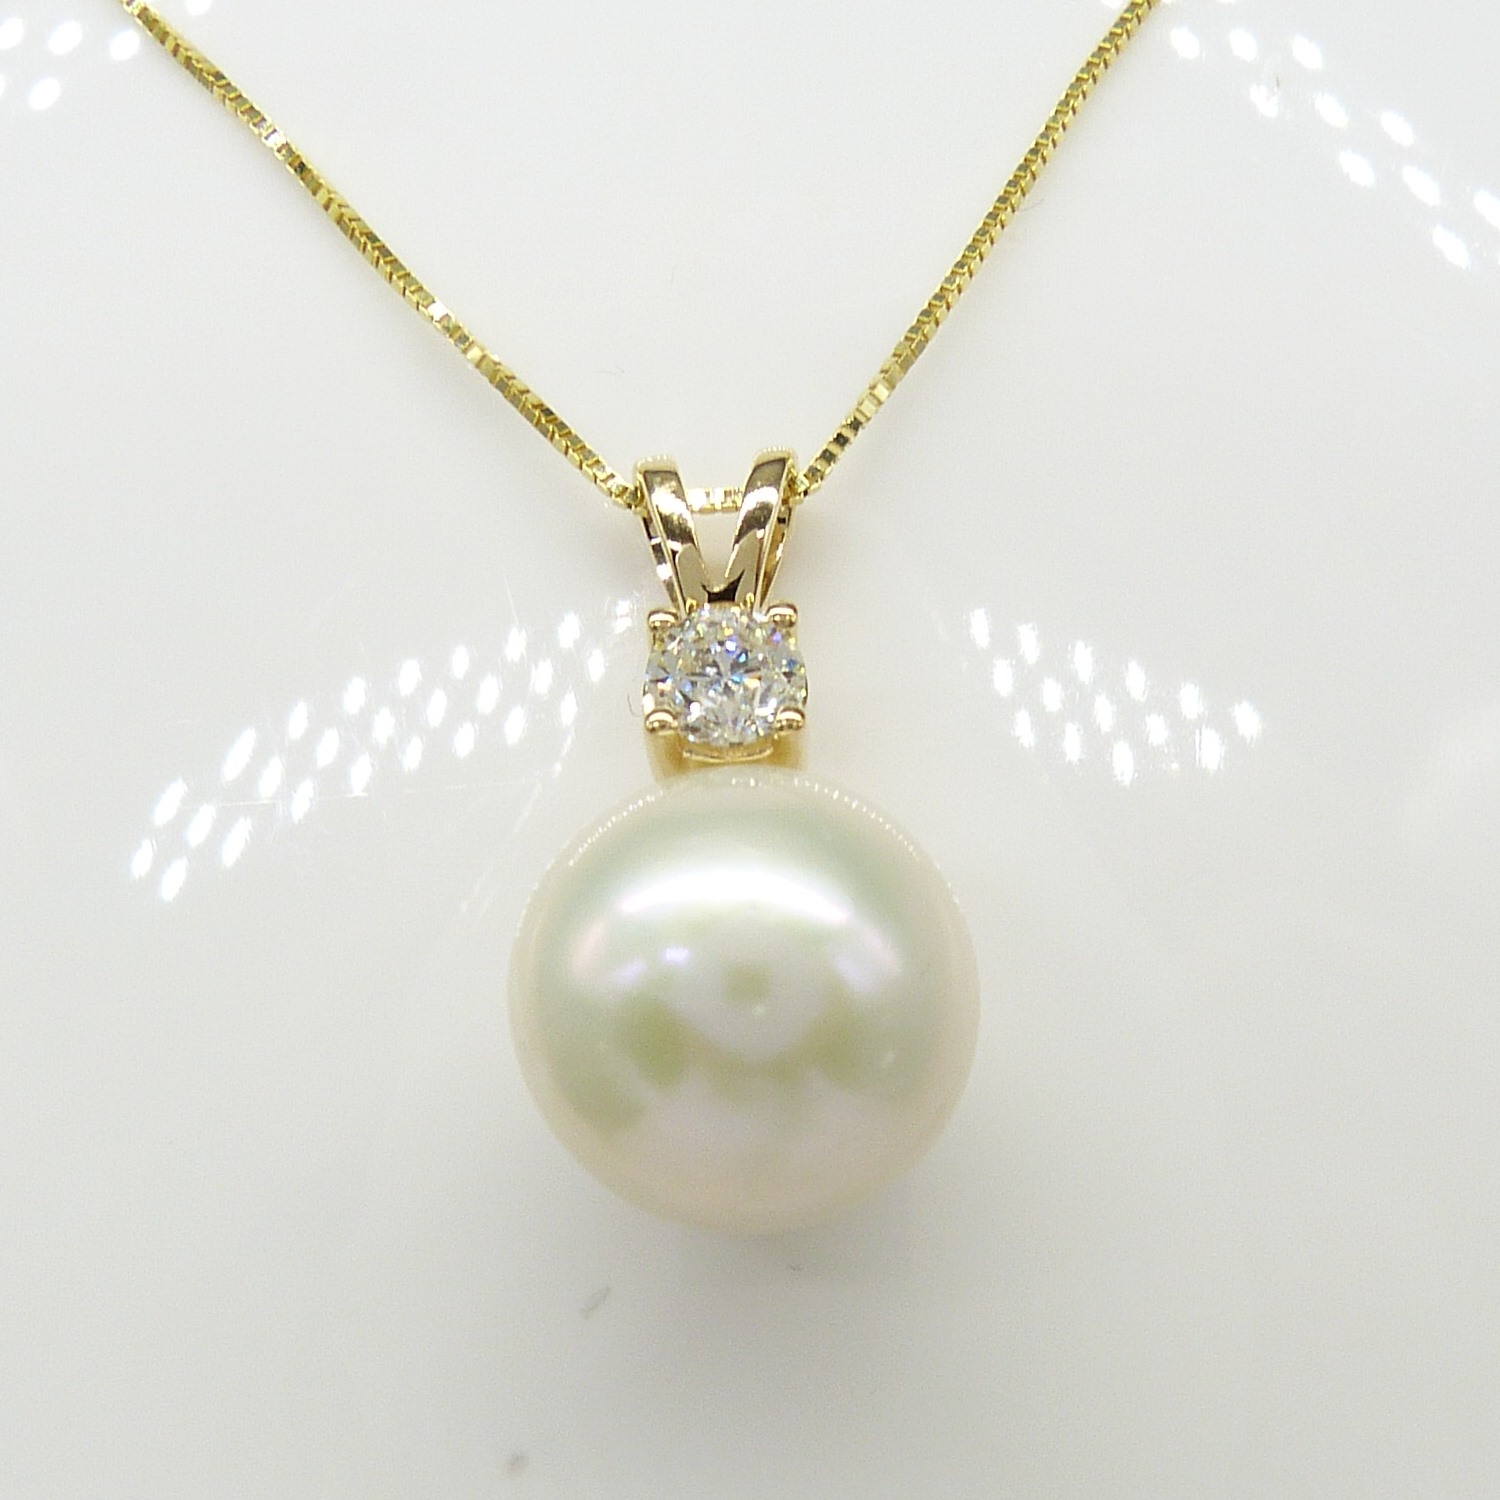 Yellow gold round freshwater pearl and 0.23 carat diamond necklace - Image 5 of 6